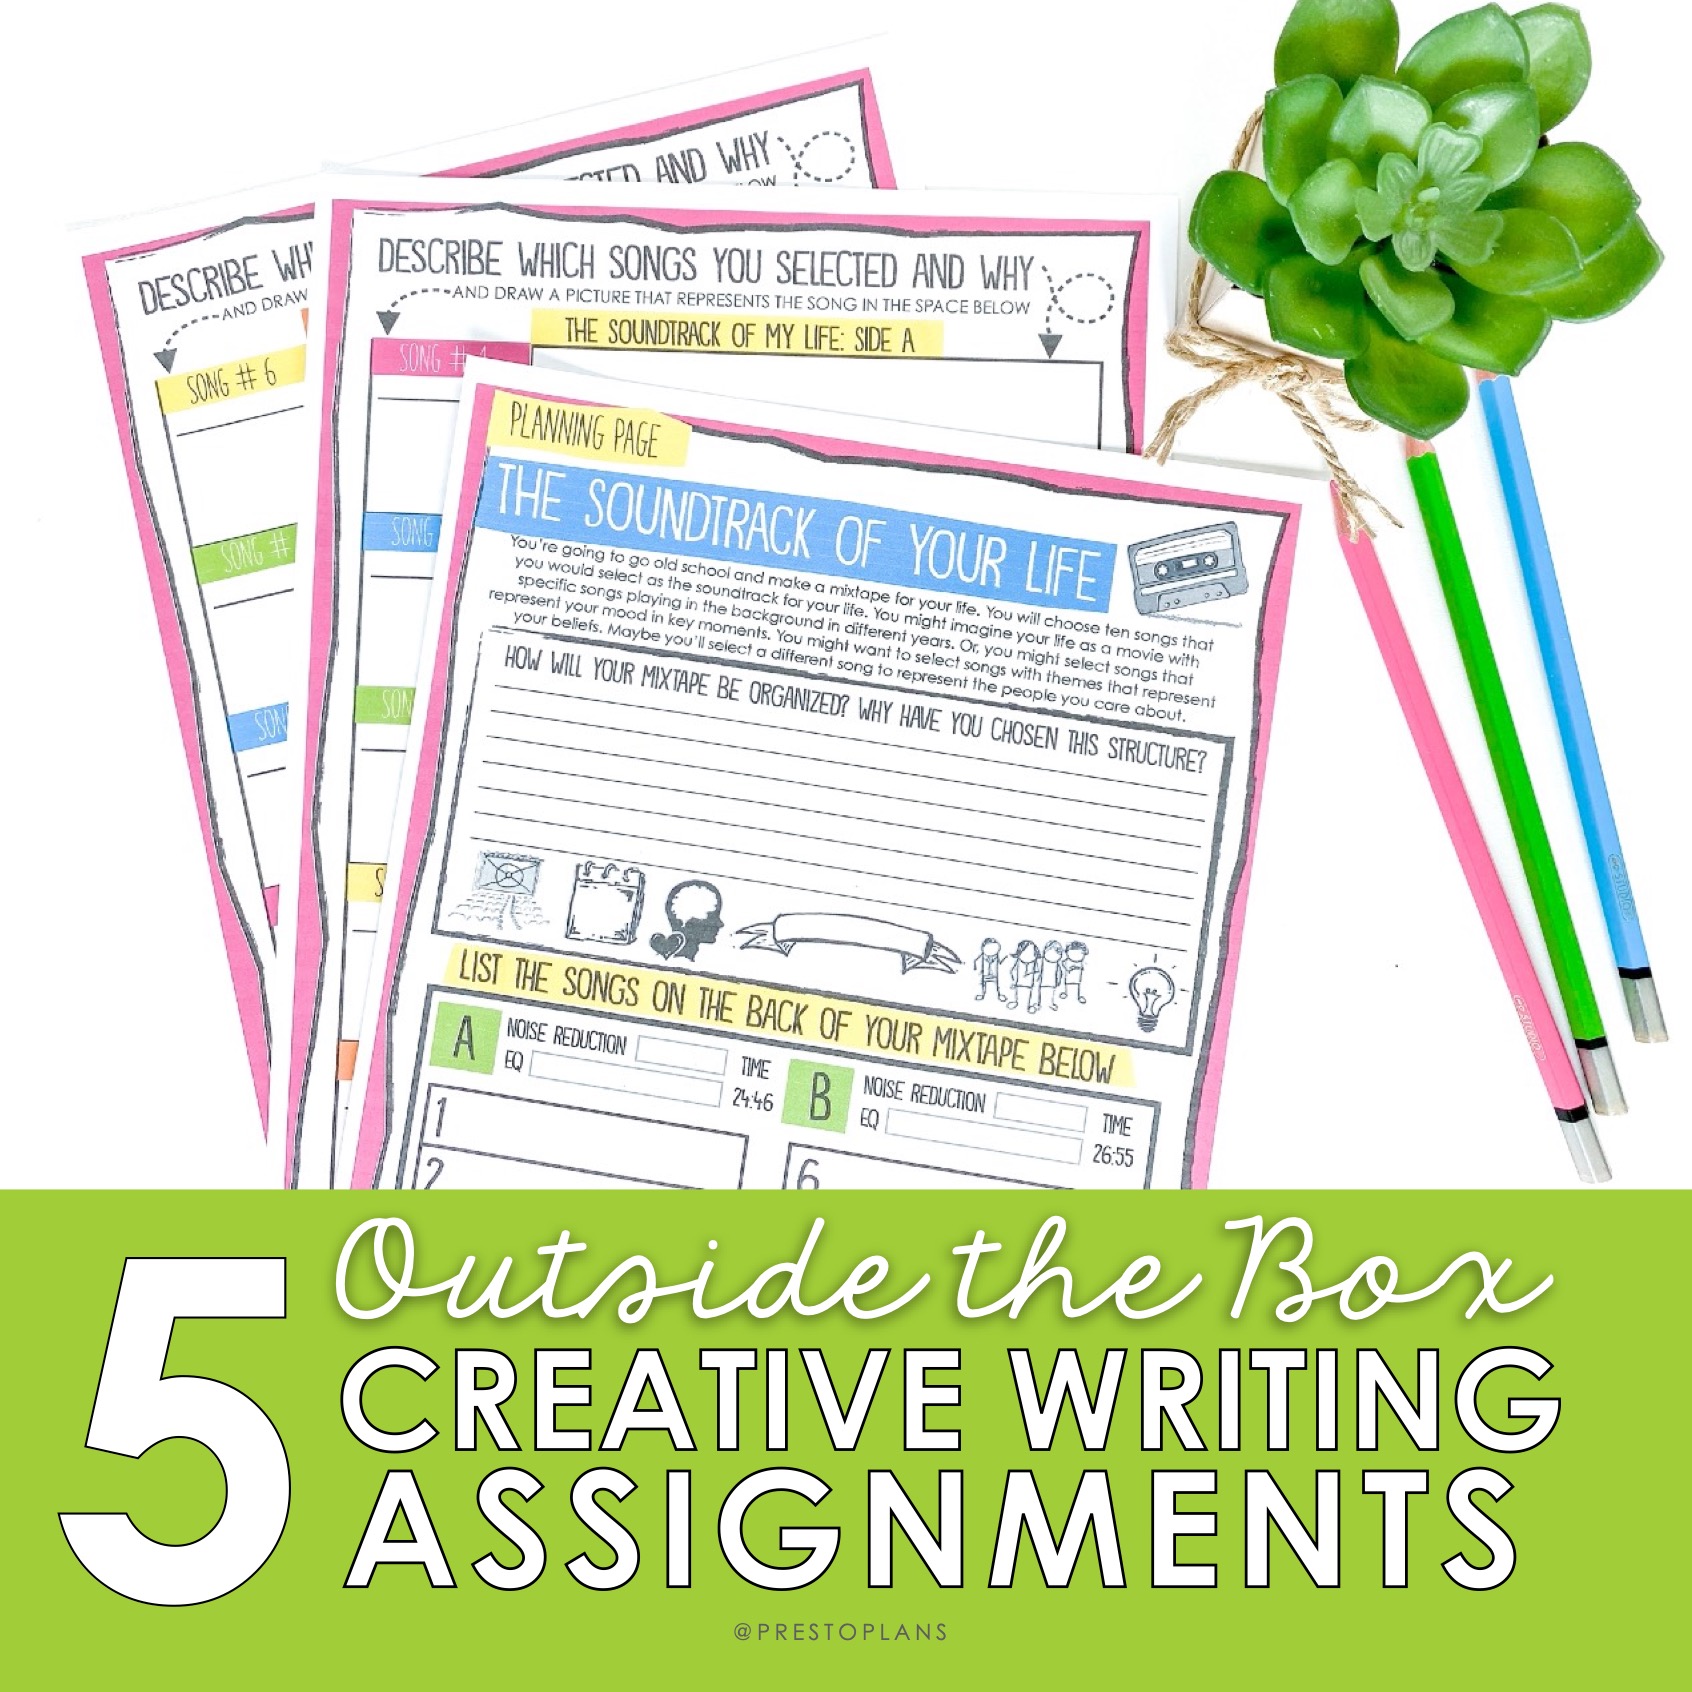 assignment ideas for students